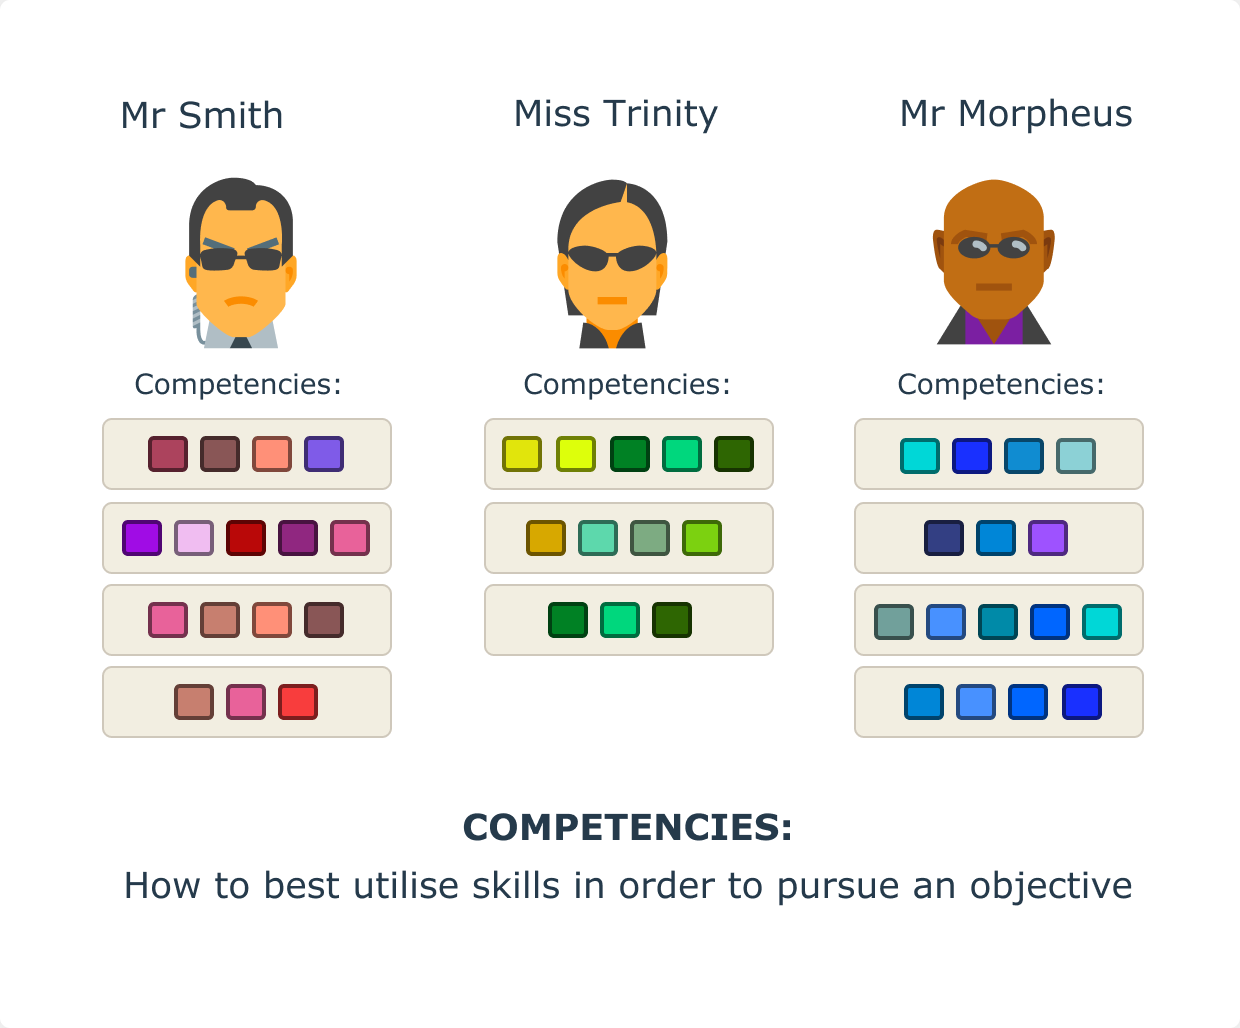 Competencies tell us how to best utilise skills in order to pursue an objective